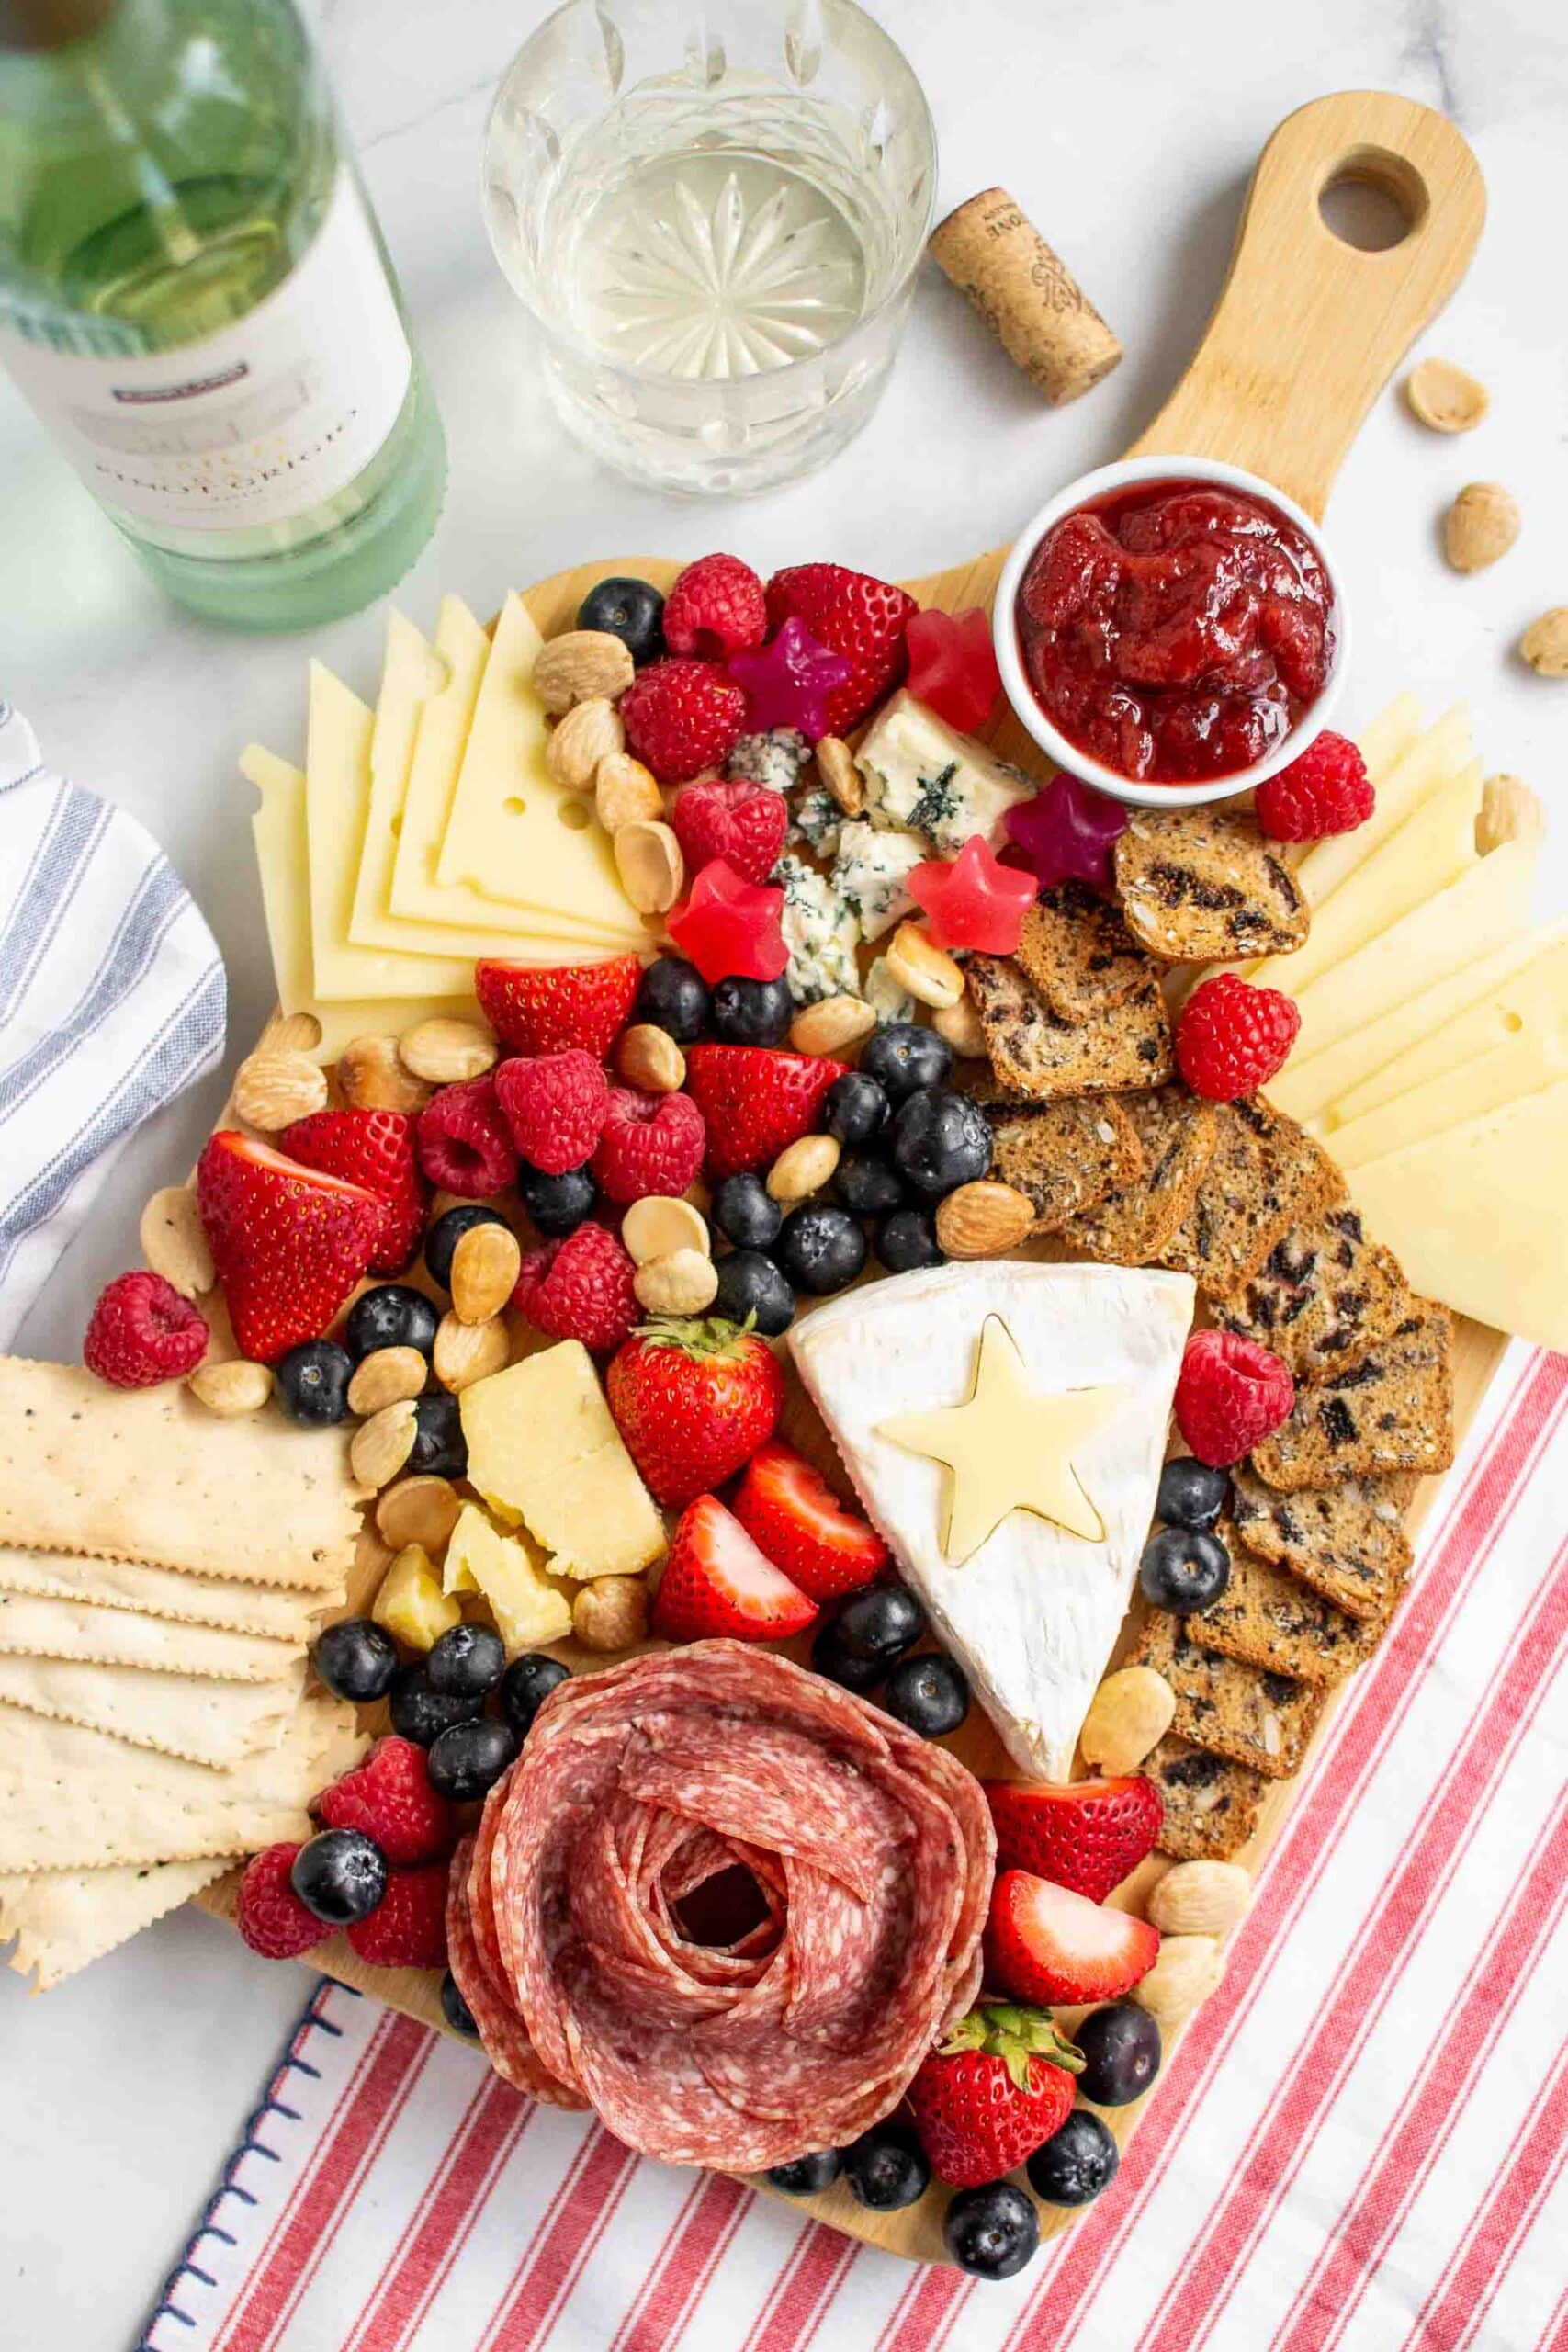 Red white and blue colored Patriotic Charcuterie Board with a wine glass and bottle